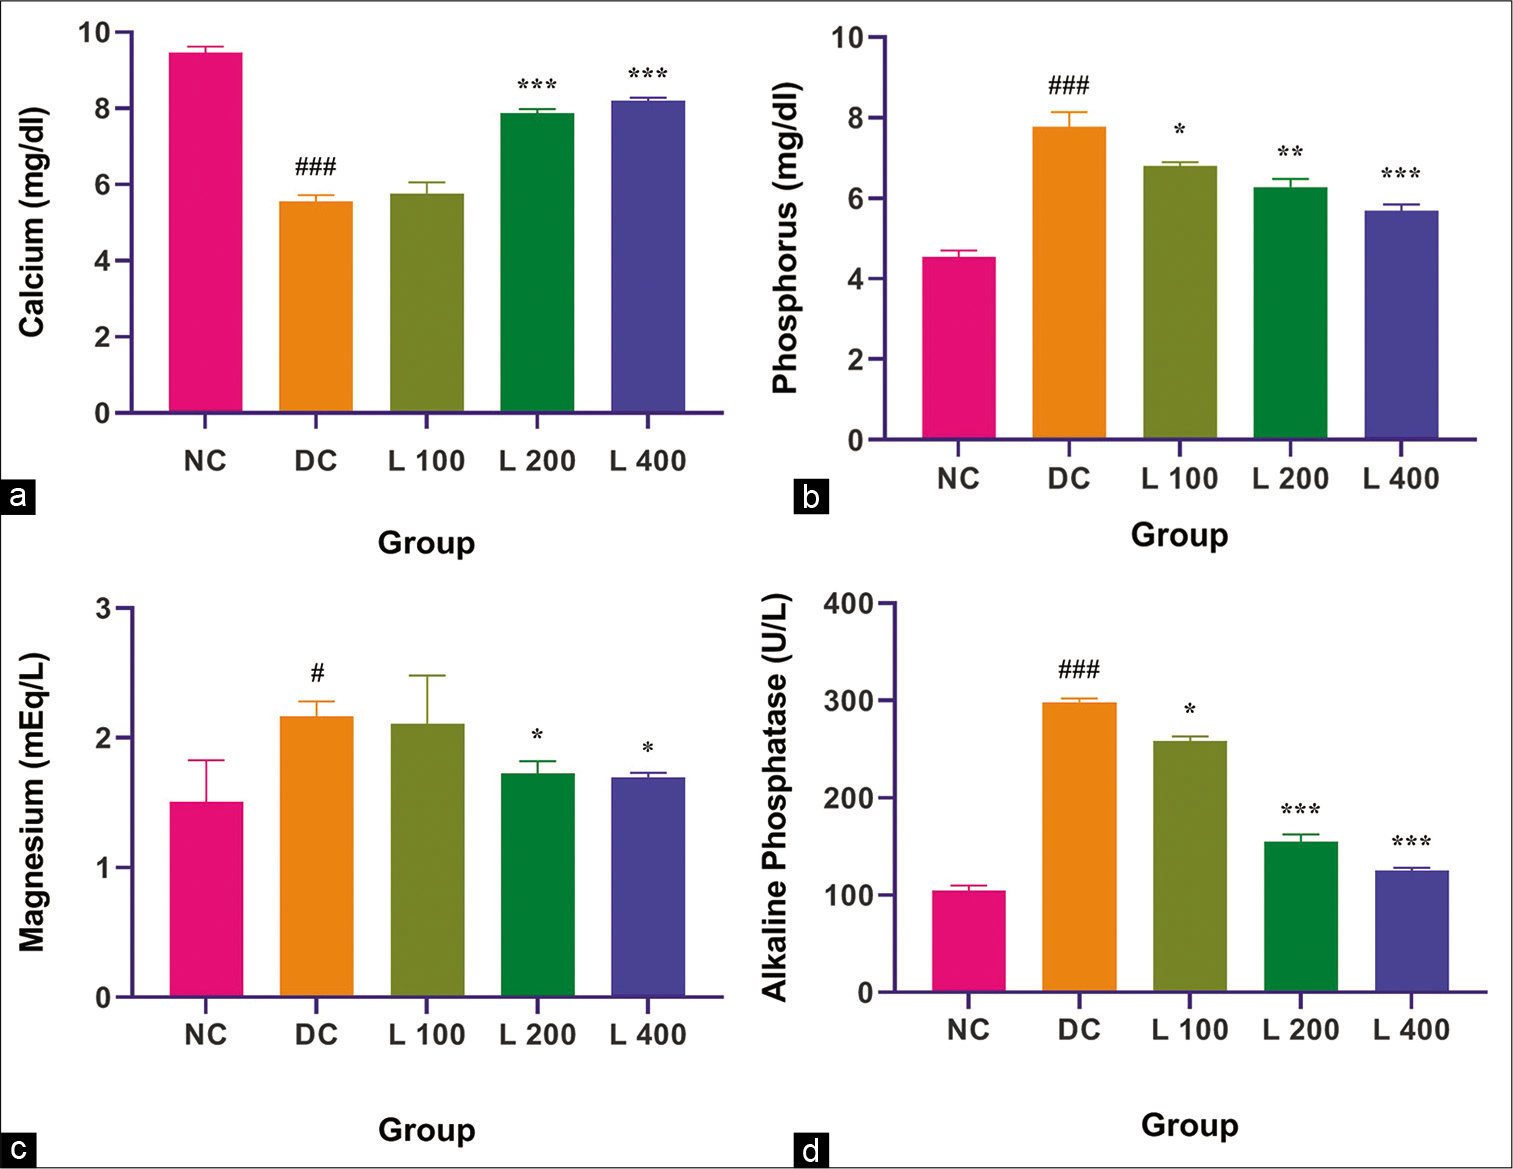 Effect of lycopene on serum vascular calcification parameters in adenine-induced chronic renal failure in the rat. (a) Calcium, (b) Phosphorus, (c) Magnesium, (d) Alkaline phosphatase. Columns and vertical bars depict mean±SEM (n=6). NC: Normal control, DC: Diseases control, L 100: 100 mg/kg Lycopene+Adenine, L 200: 200 mg/kg Lycopene+Adenine, L 400: 400 mg/kg Lycopene+Adenine. *P<0.05 compared with disease versus different treatment groups, **P<0.001 compared with disease versus different treatment groups, ***P<0.0001 compared with disease versus different treatment groups, #P<0.05 compared with normal versus disease groups, ###P<0.0001 compared with normal versus disease groups.